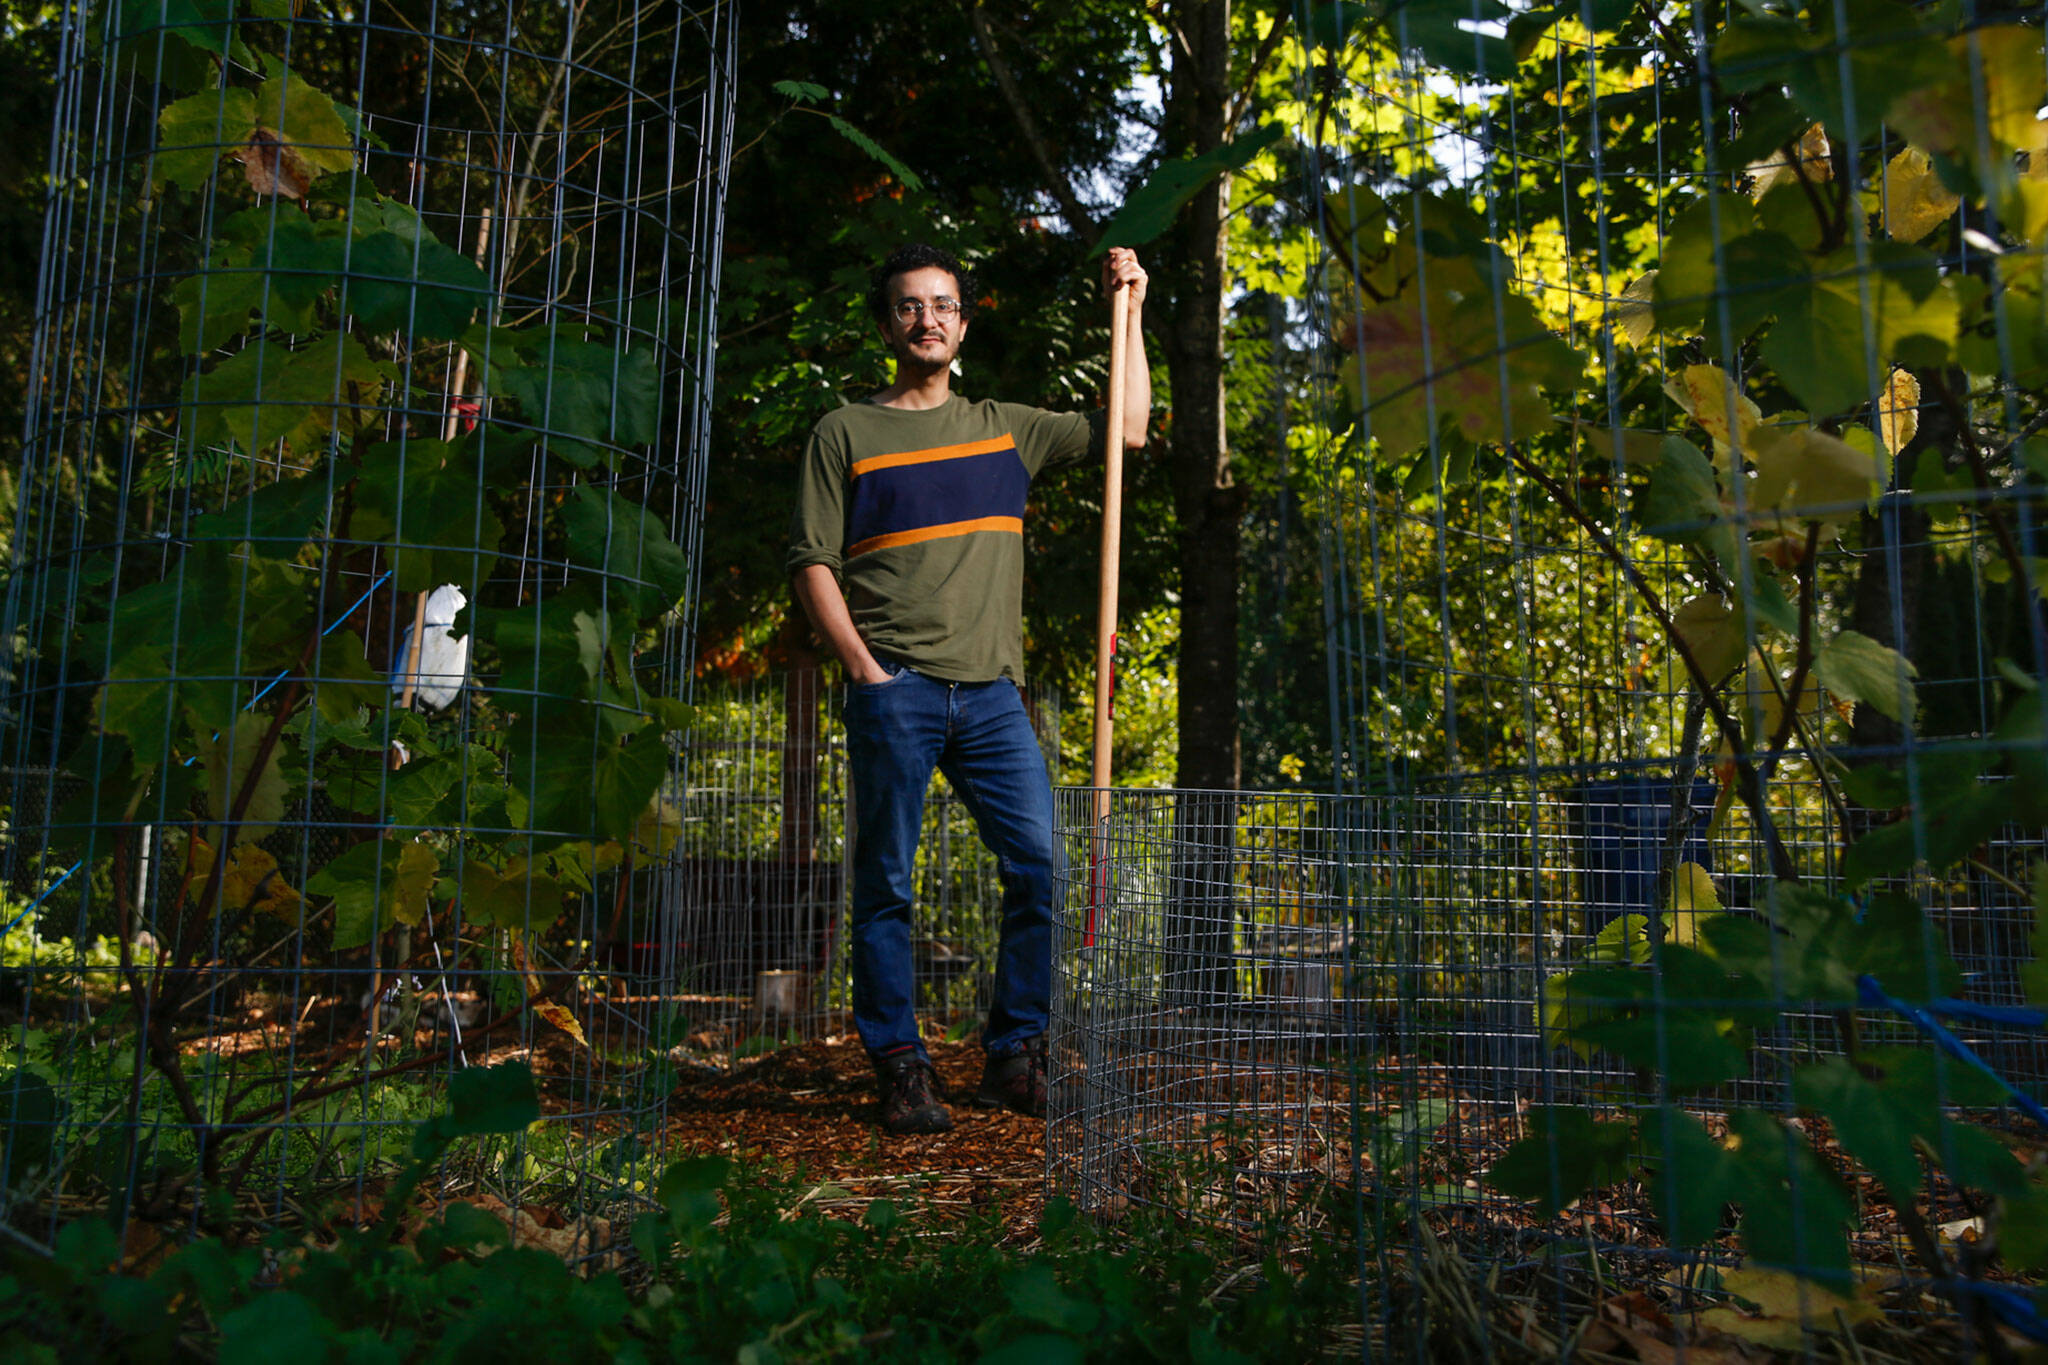 Saman Shareghi is organically farming in his parents’ yard in Bothell. (Kevin Clark / The Herald)